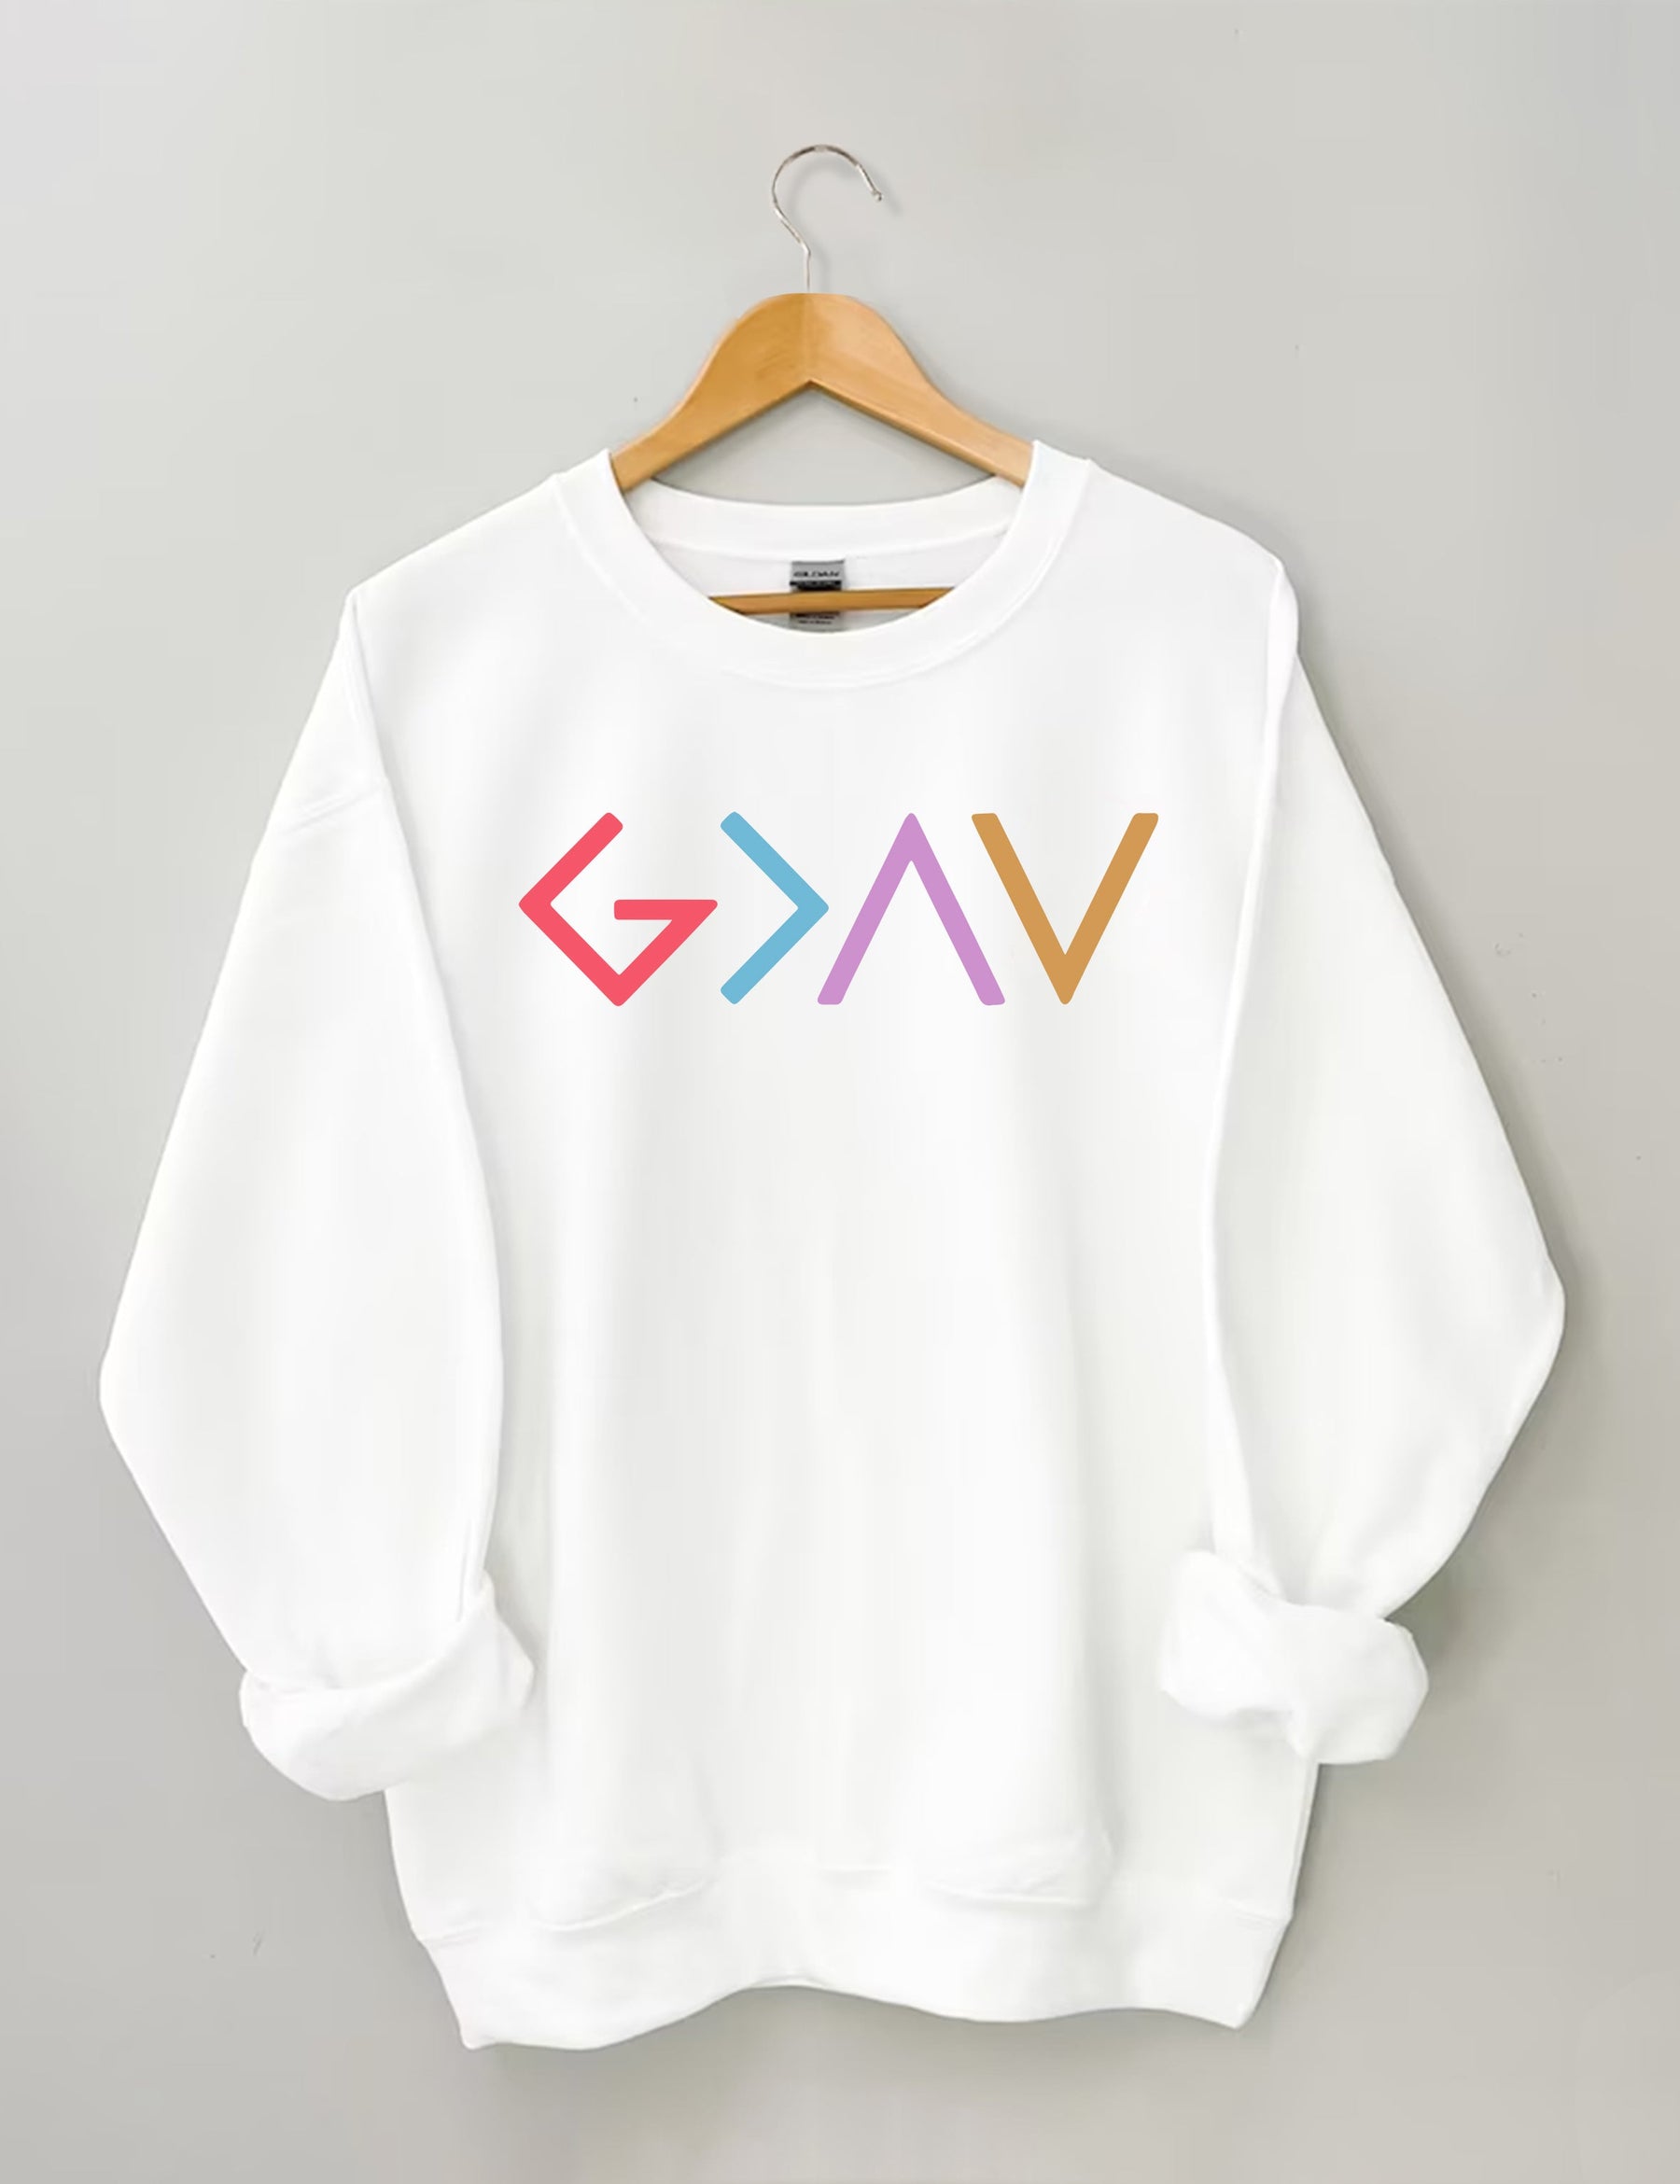 God Is Greater Than The Highs And Lows Sweatshirt